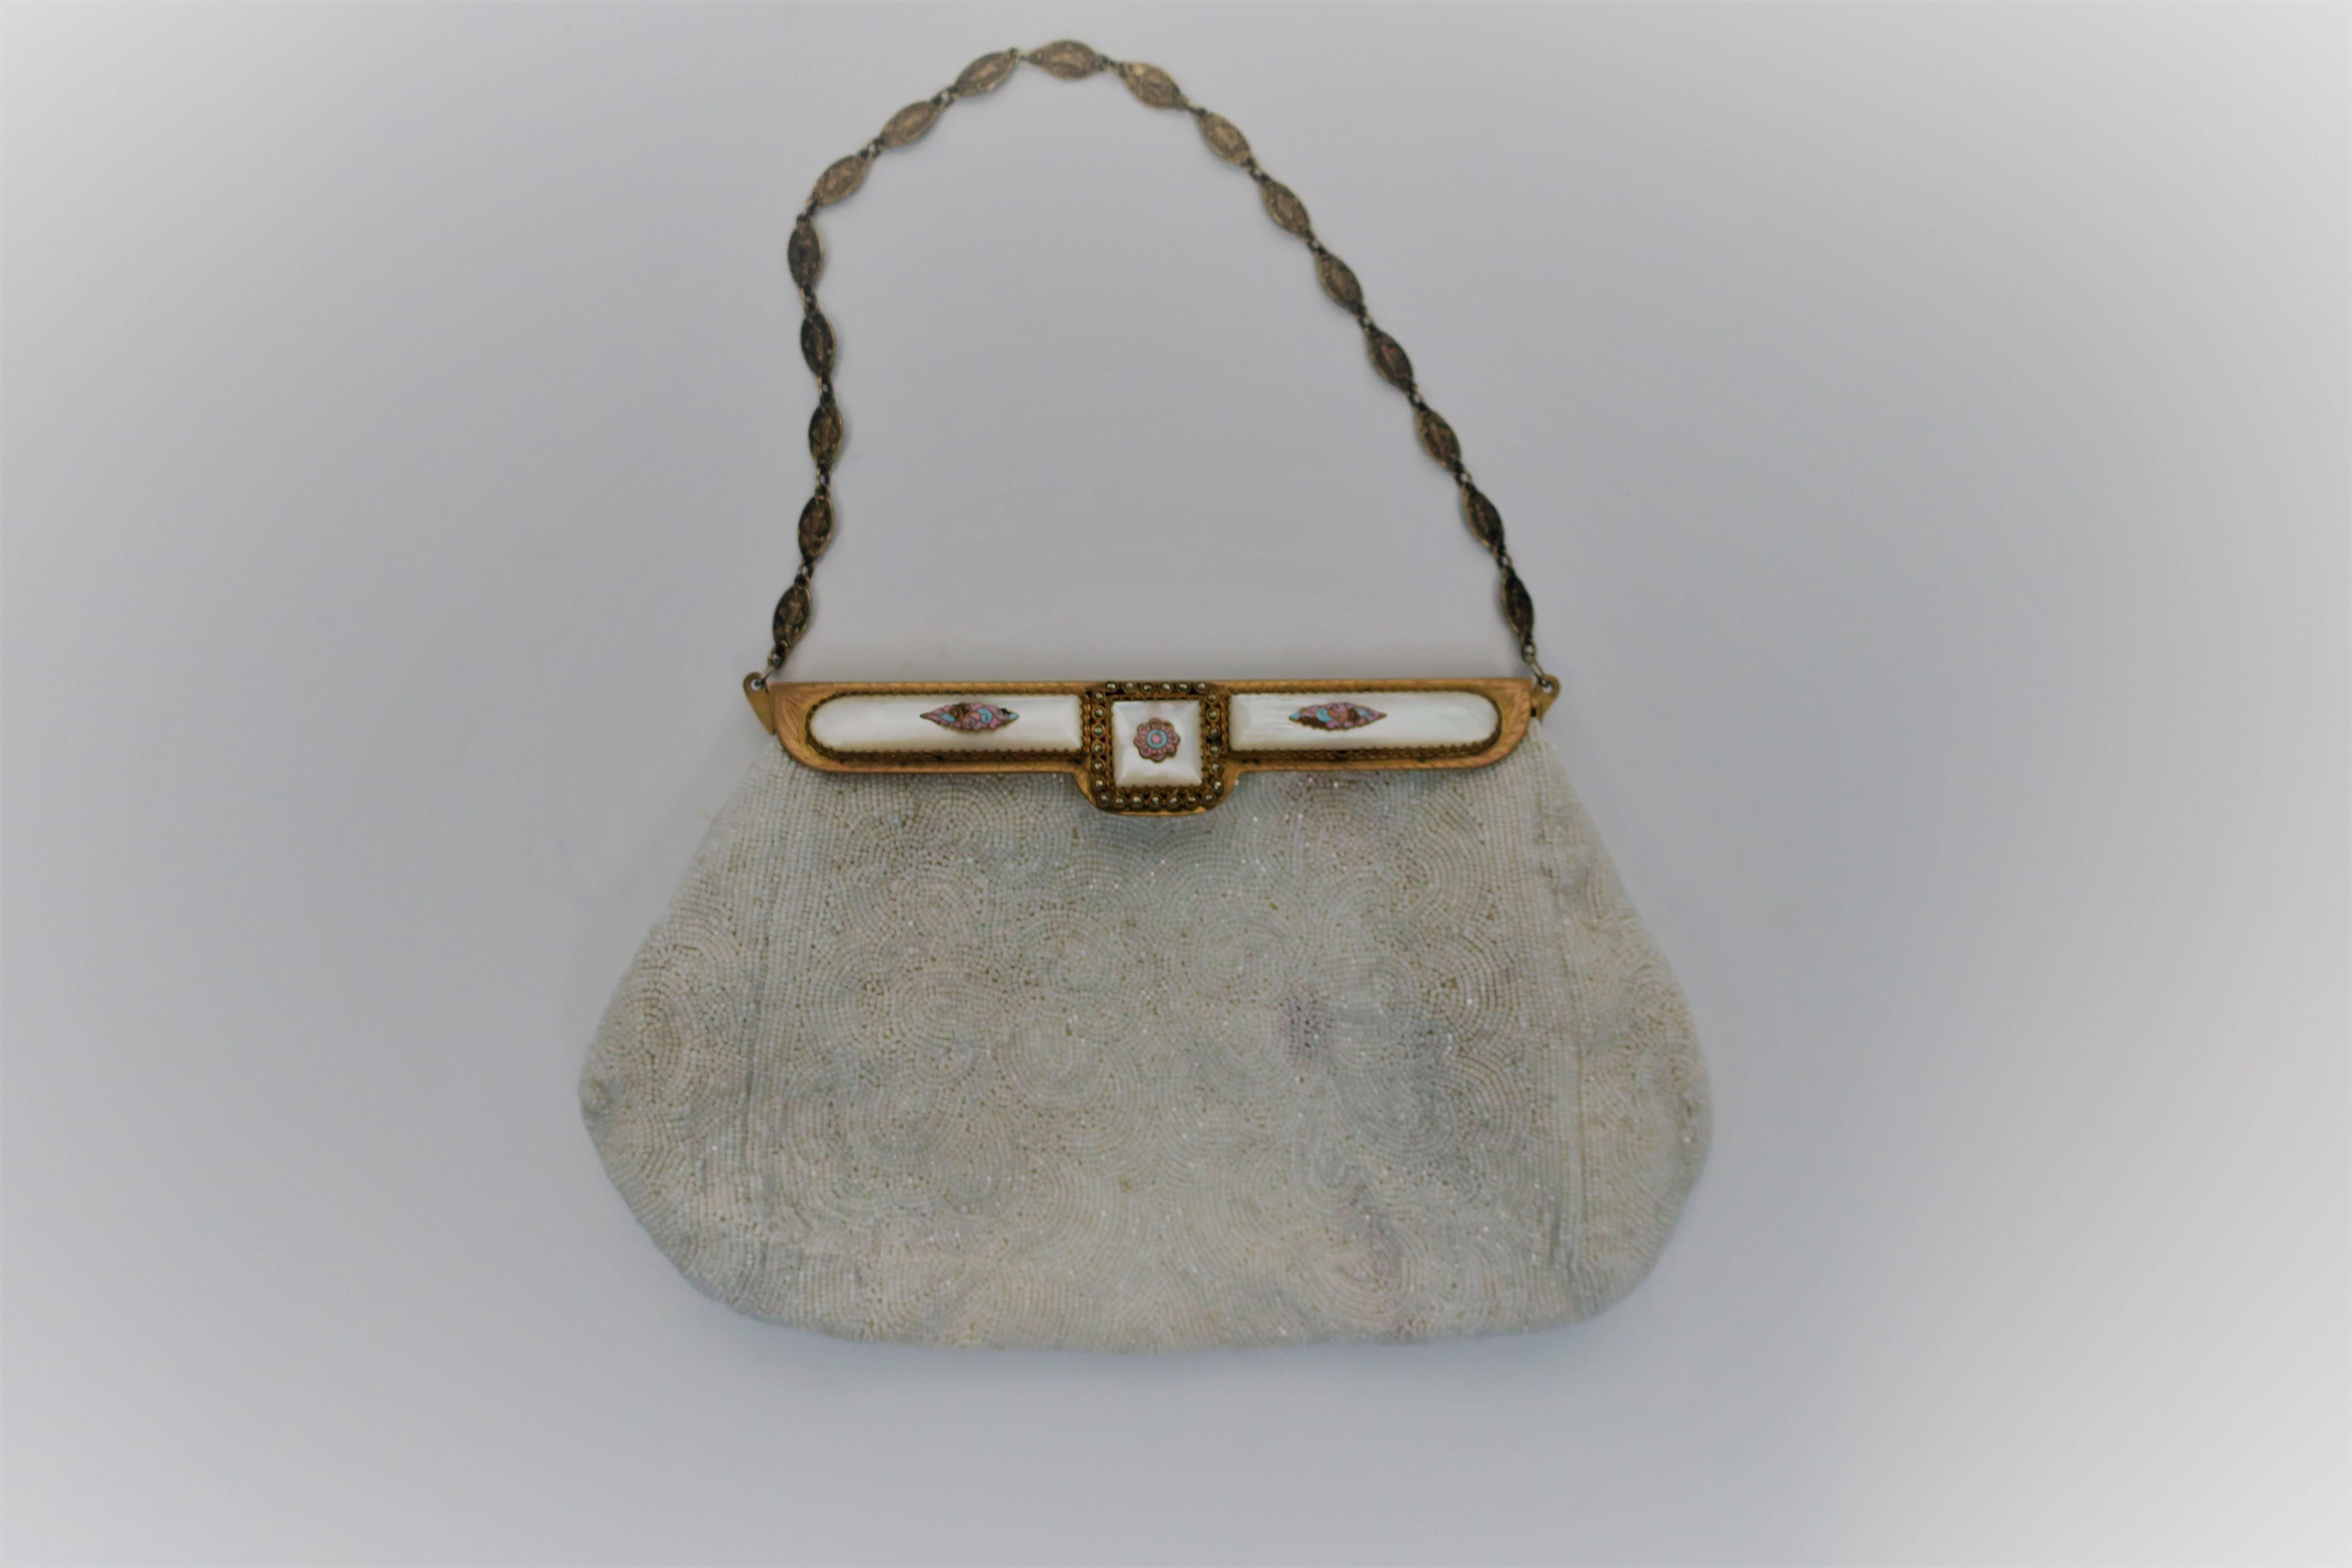 A beautiful vintage white beaded handbag with brass hardware decorated with Mother-Of-Pearl, pastel enamels and marcasite details, circa early to mid-20th century. Europe. Closure specifically is marcasite, pastel enamel of pink and blue, and